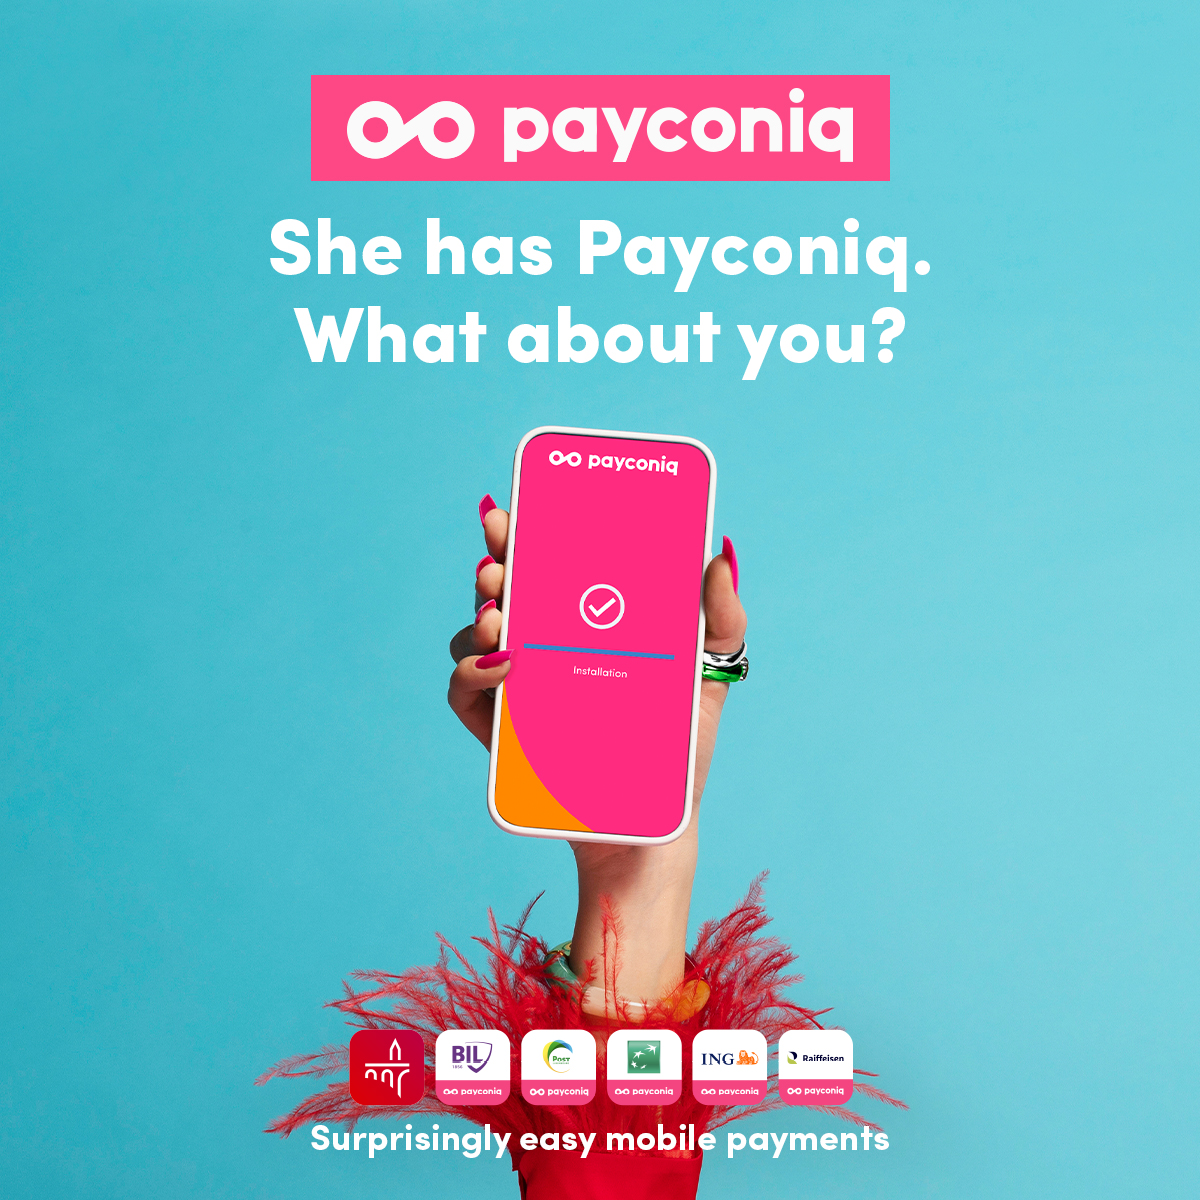 #NewAds #WeArePayconiq 

She has Payconiq. What about you? 🤳  

We are launching at Payconiq Luxembourg our new media campaign, with the ambition always to make your life easier 🌟

Discover more  payconiq.lu

#payments #innovation #europe #luxembourg